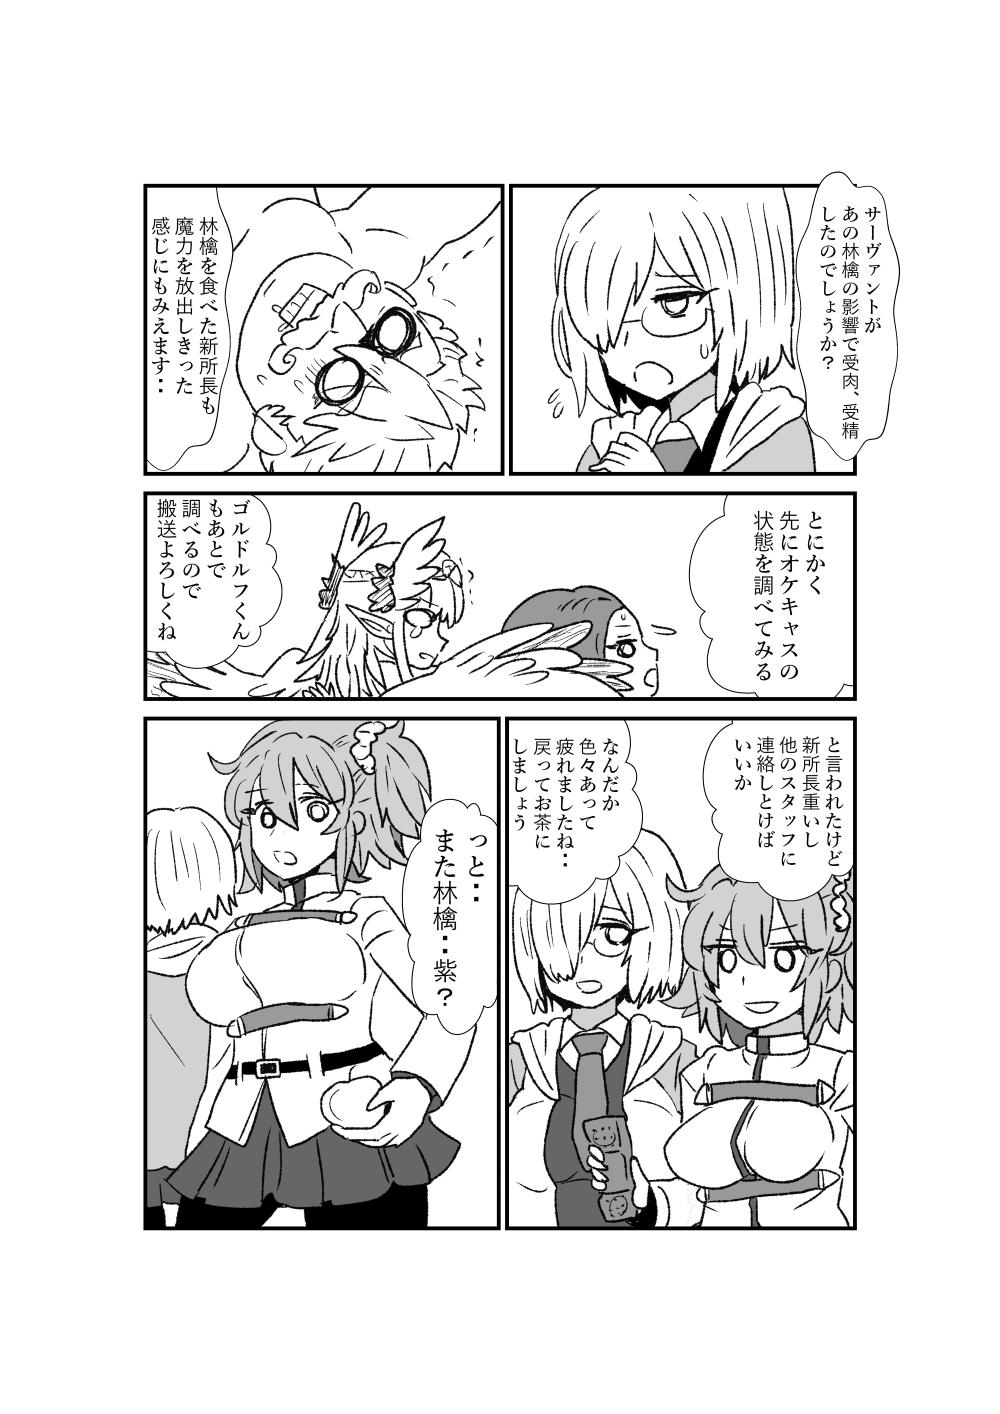 Orgia FPO~桃色林檎の種付け周回～ - Fate grand order Gangbang - Page 9